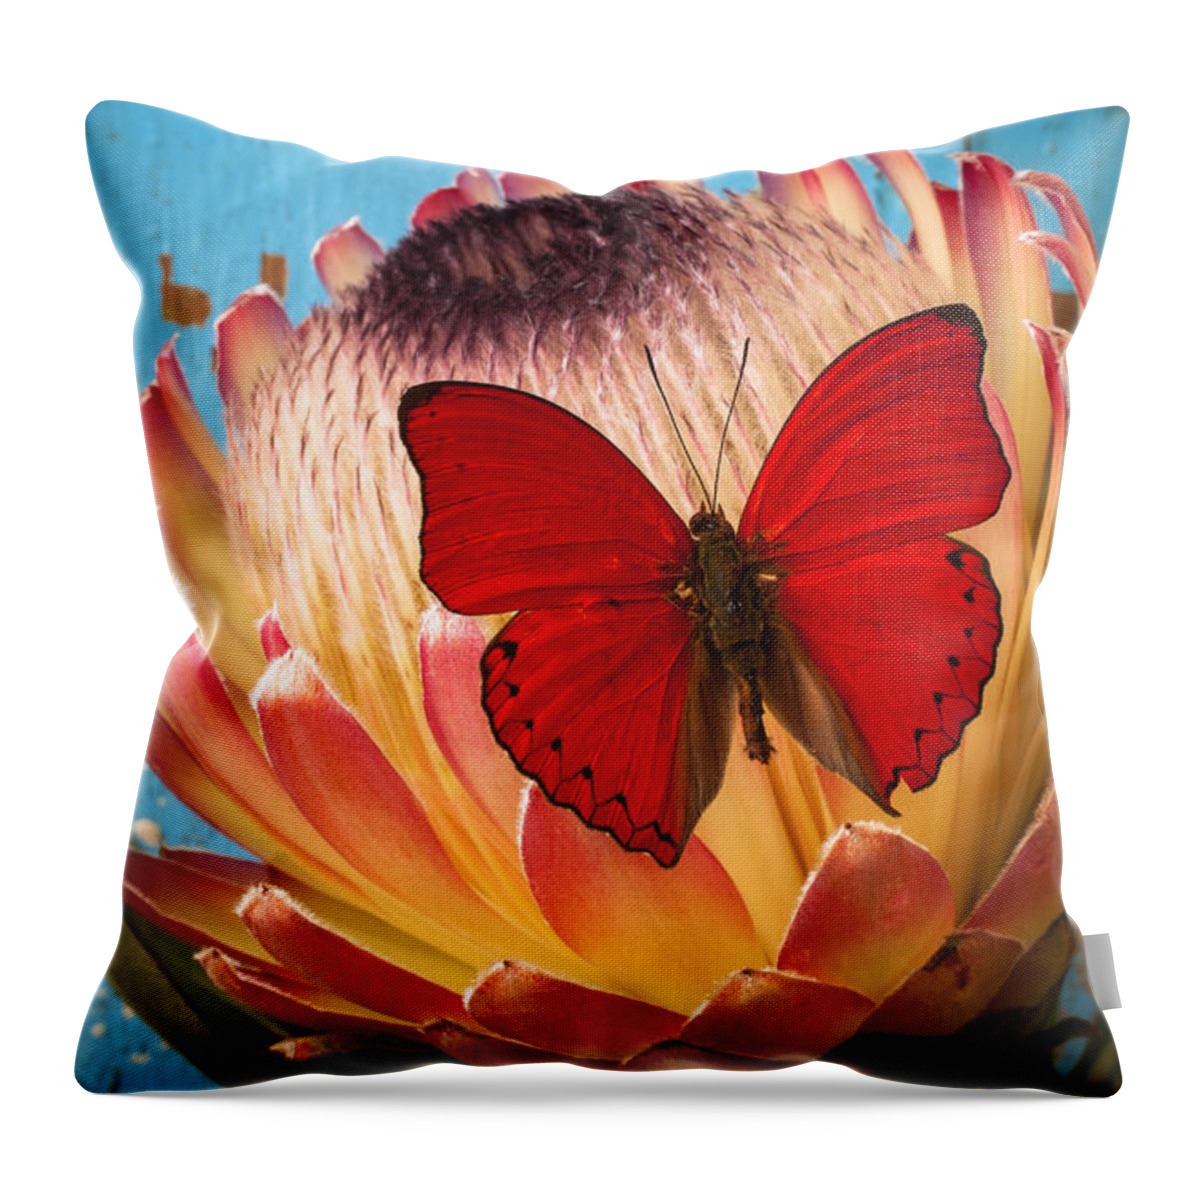 Protea Throw Pillow featuring the photograph Red butterfly on Protea by Garry Gay